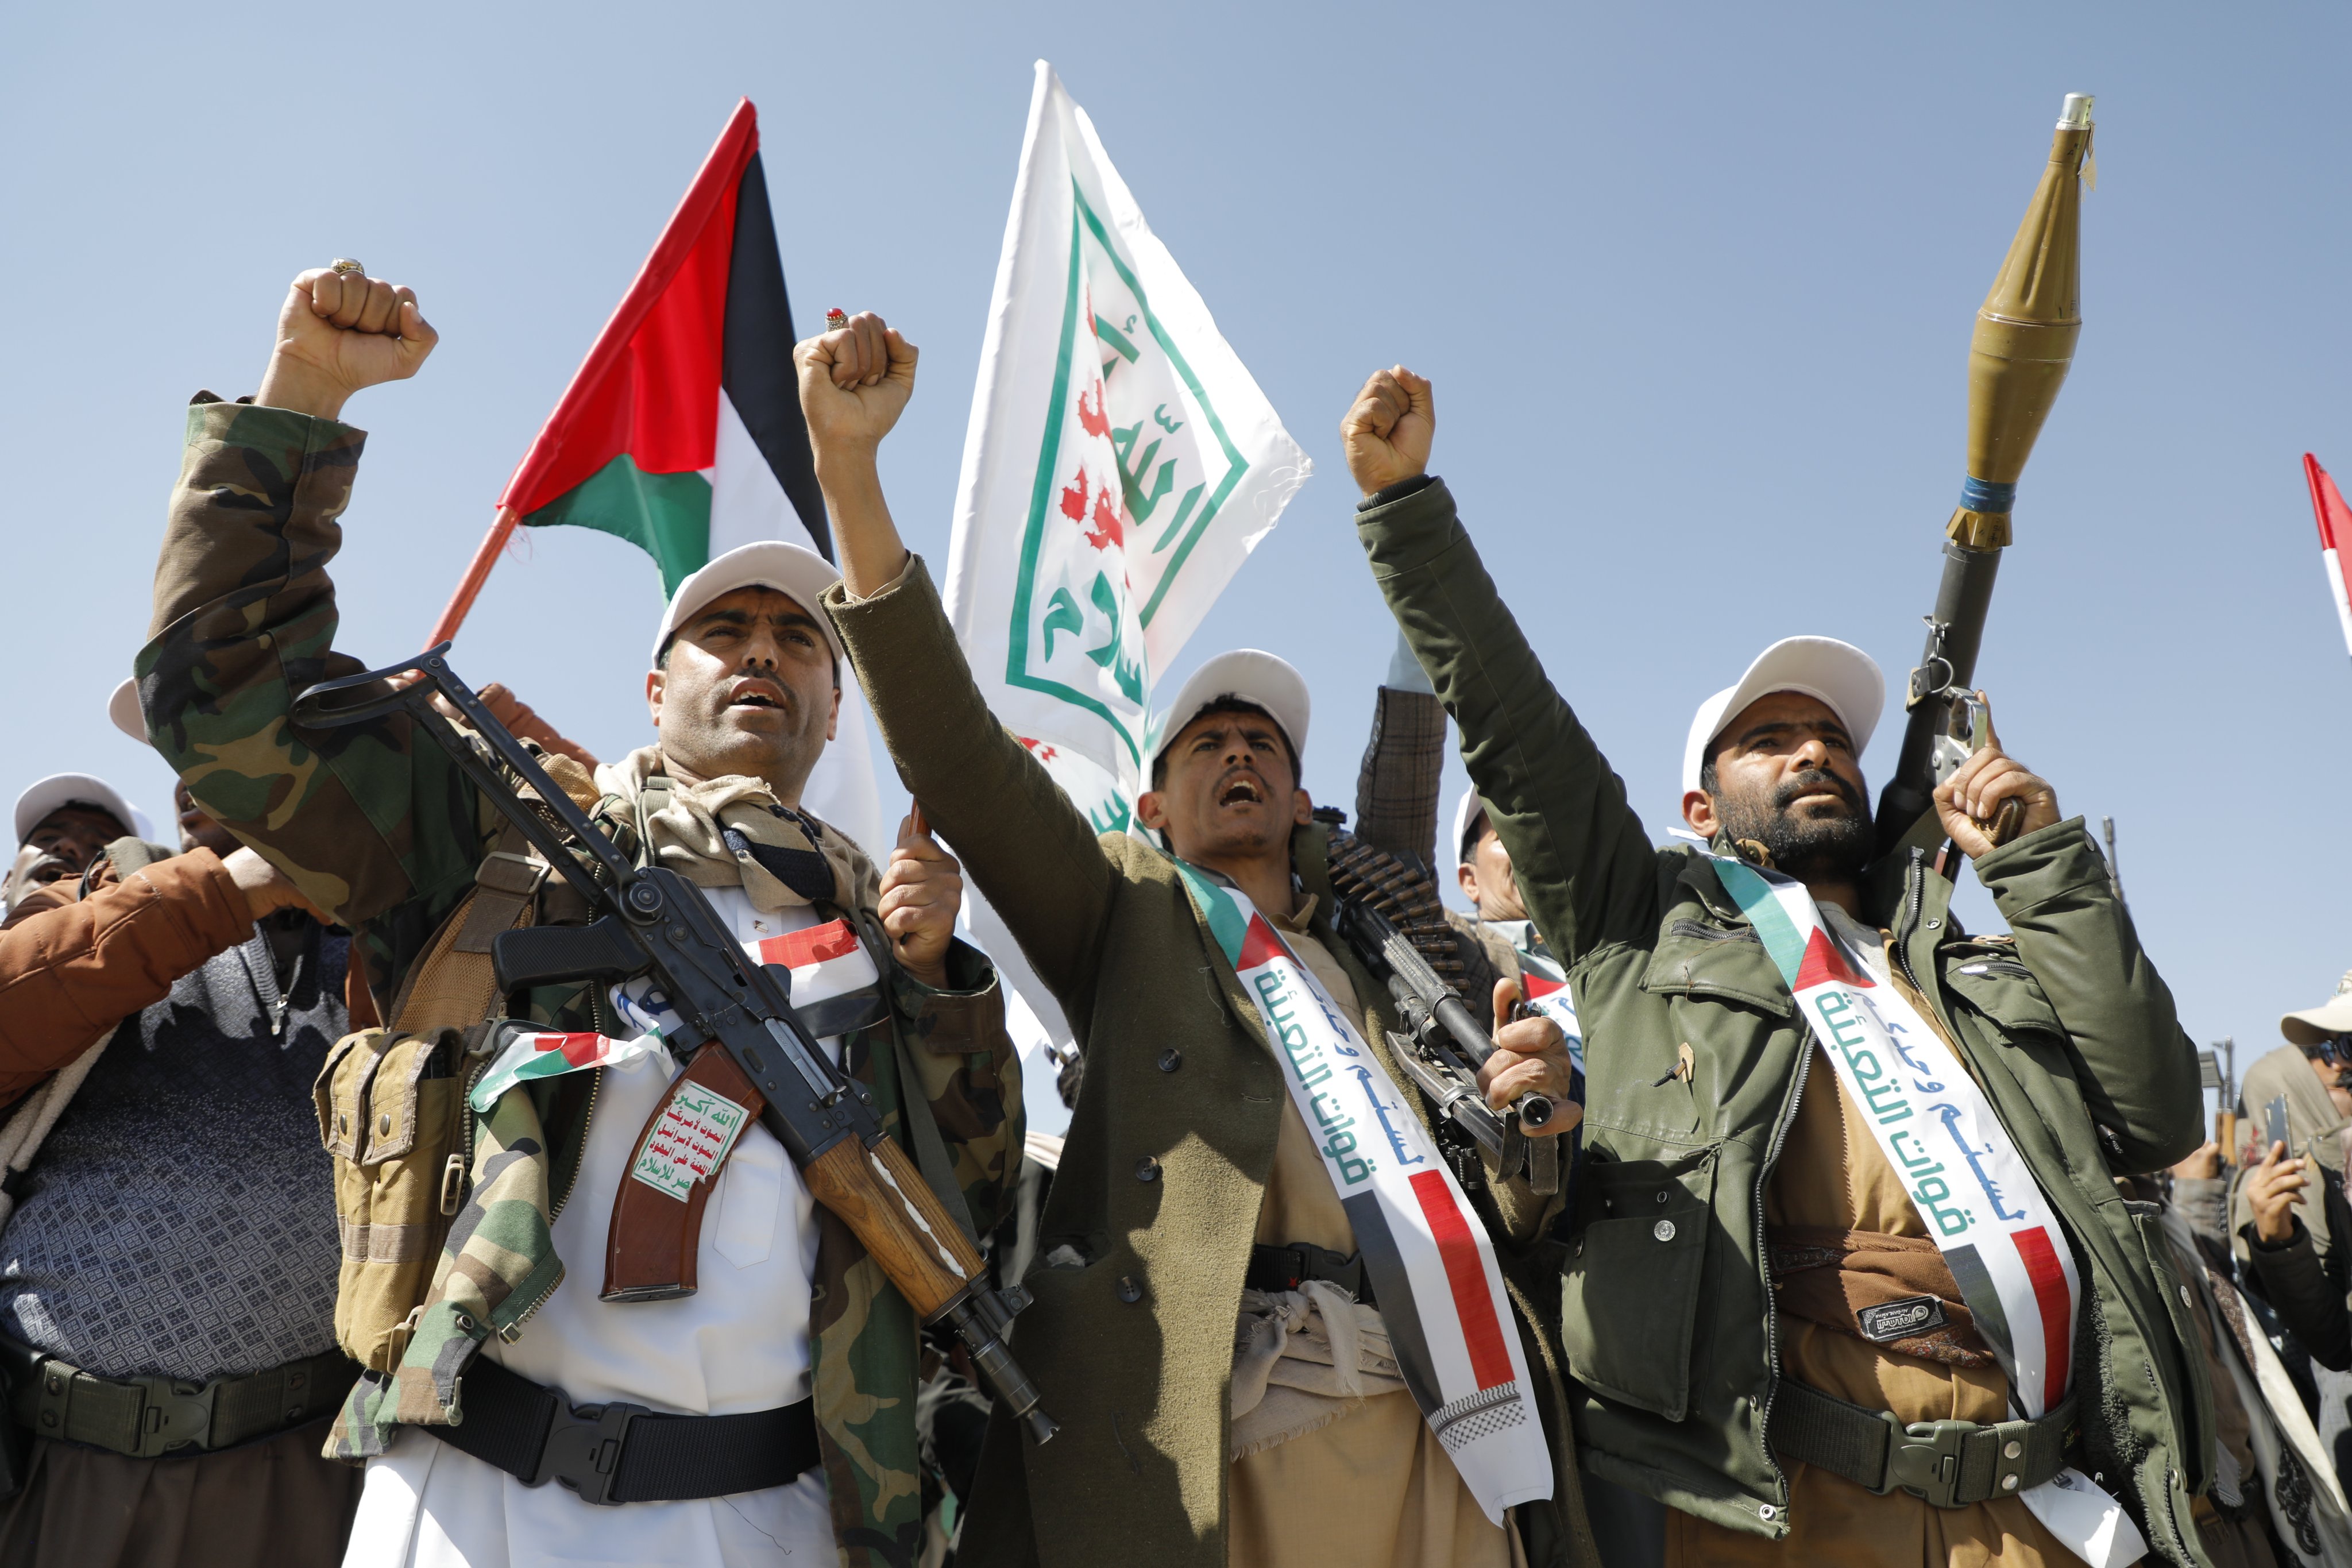 Newly-recruited members of the Houthis’ armed forces march during a parade in Yemen’s Amran province on December 20. Analysts warn that Houthi attacks on Red Sea shipping are a “clear sign of the outcome” of the continuation of Israel’s war in Gaza. Photo: EPA-EFE